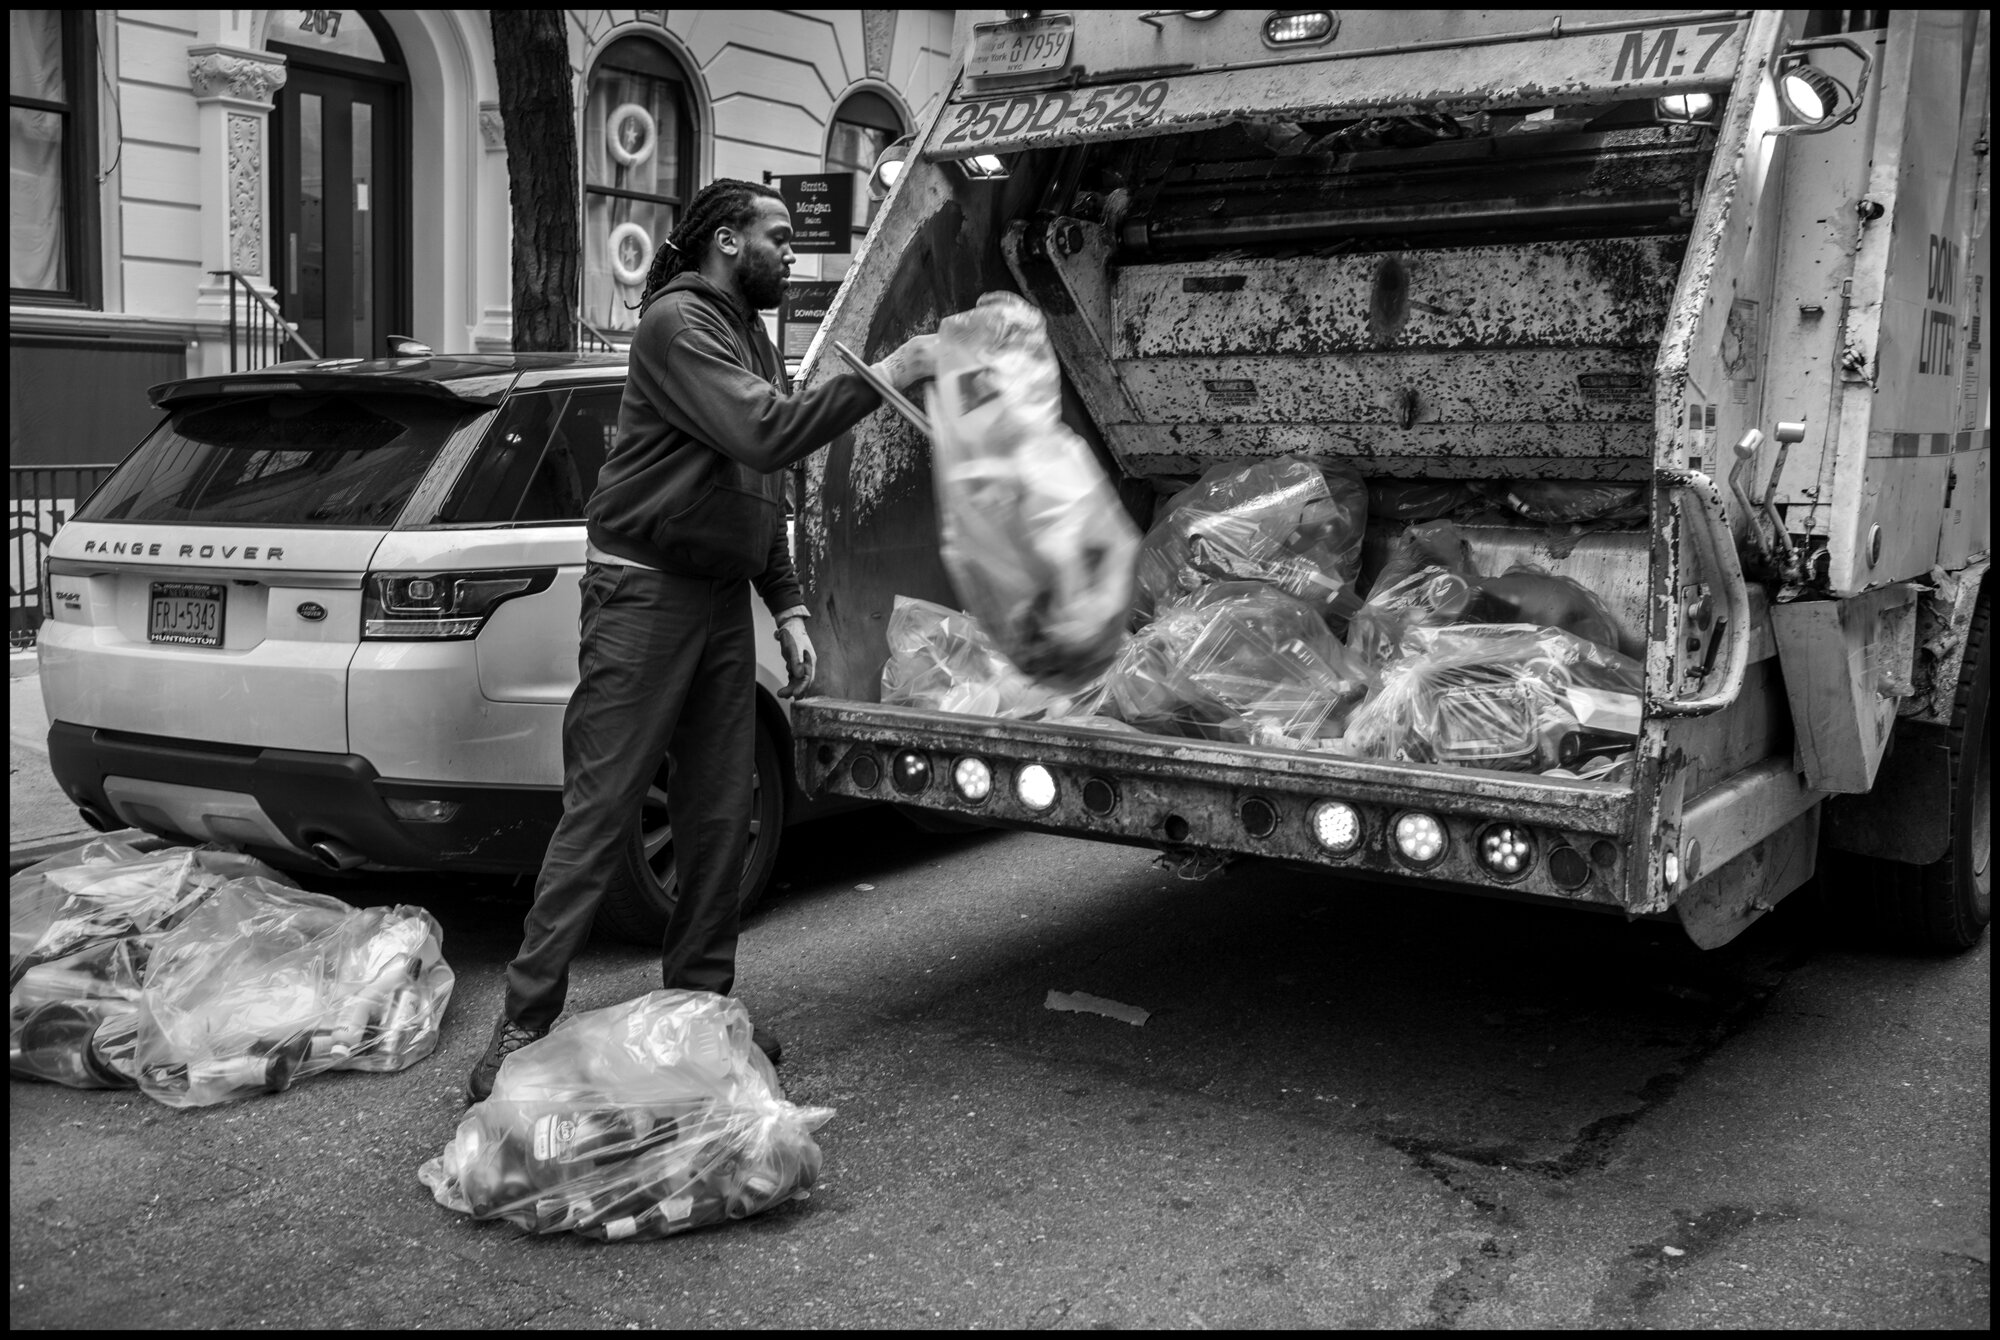  Kevin, 35, works as a garbage collector-another of the many unsung heroes of this moment.   March 28, 2020. © Peter Turnley.  ID# 06-006 